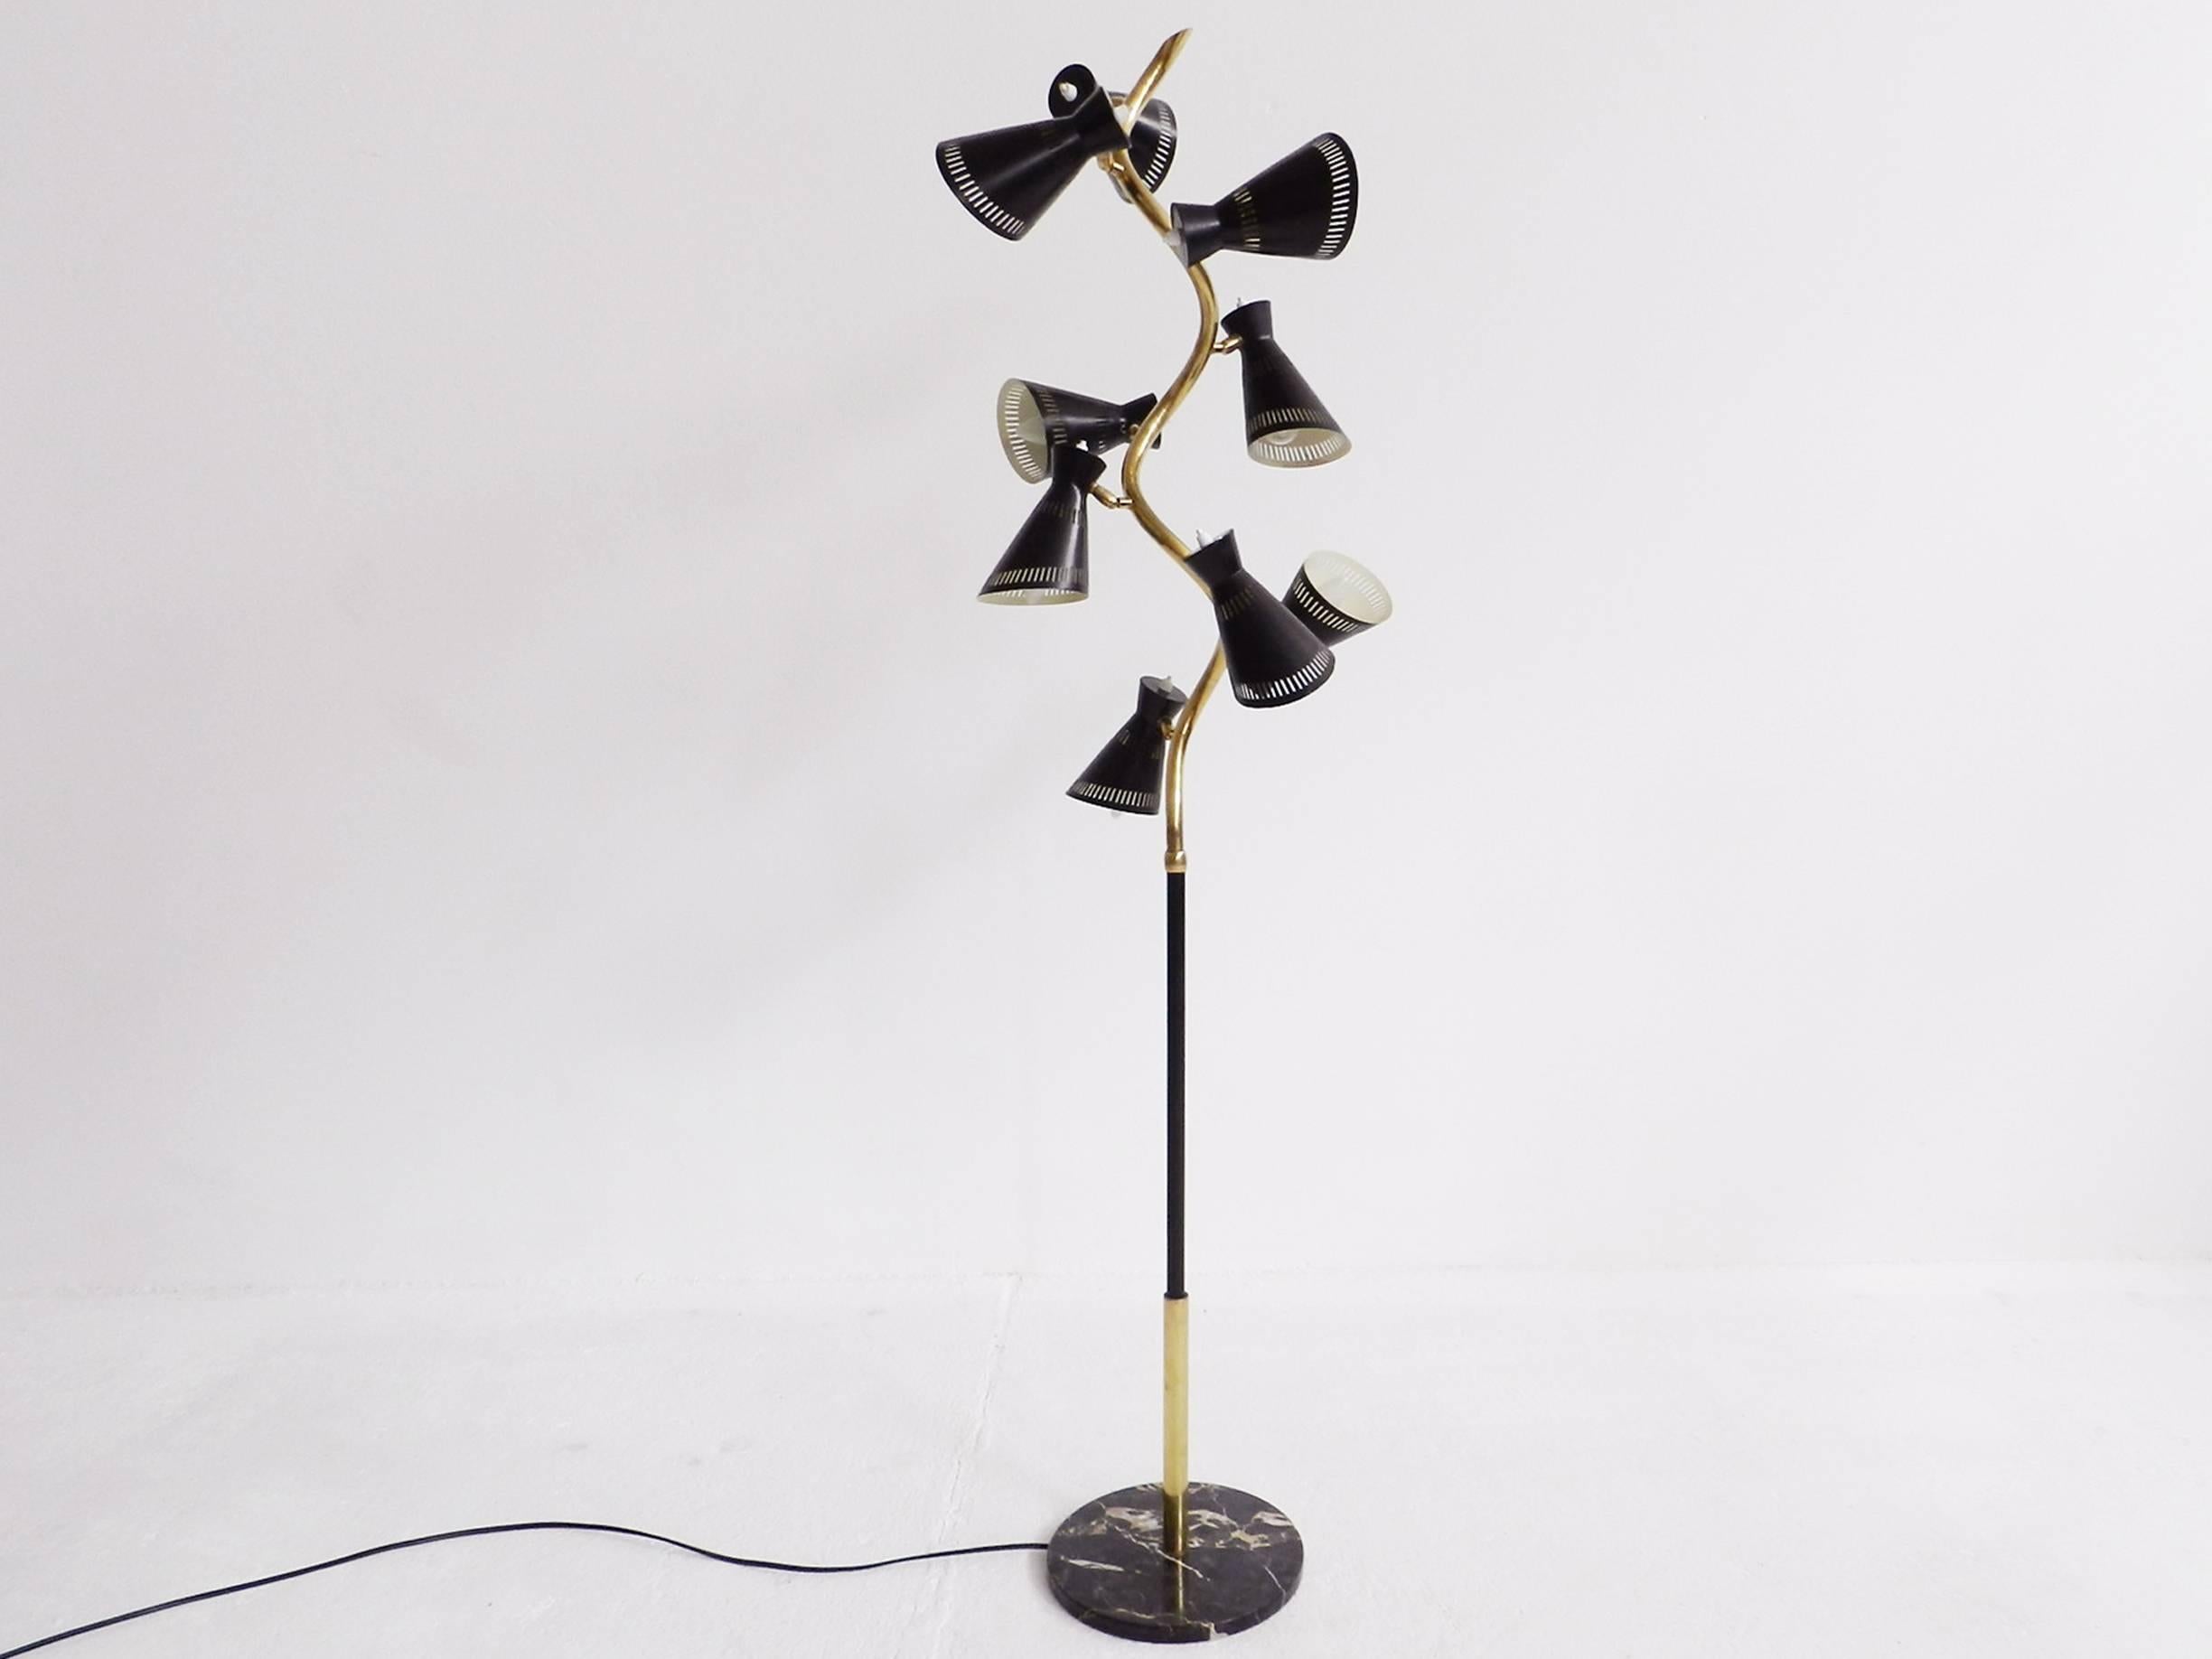 Brass floor lamp with nine black shades.
The shades can be adjusted.
The marble bass has a diameter of 30 cm.